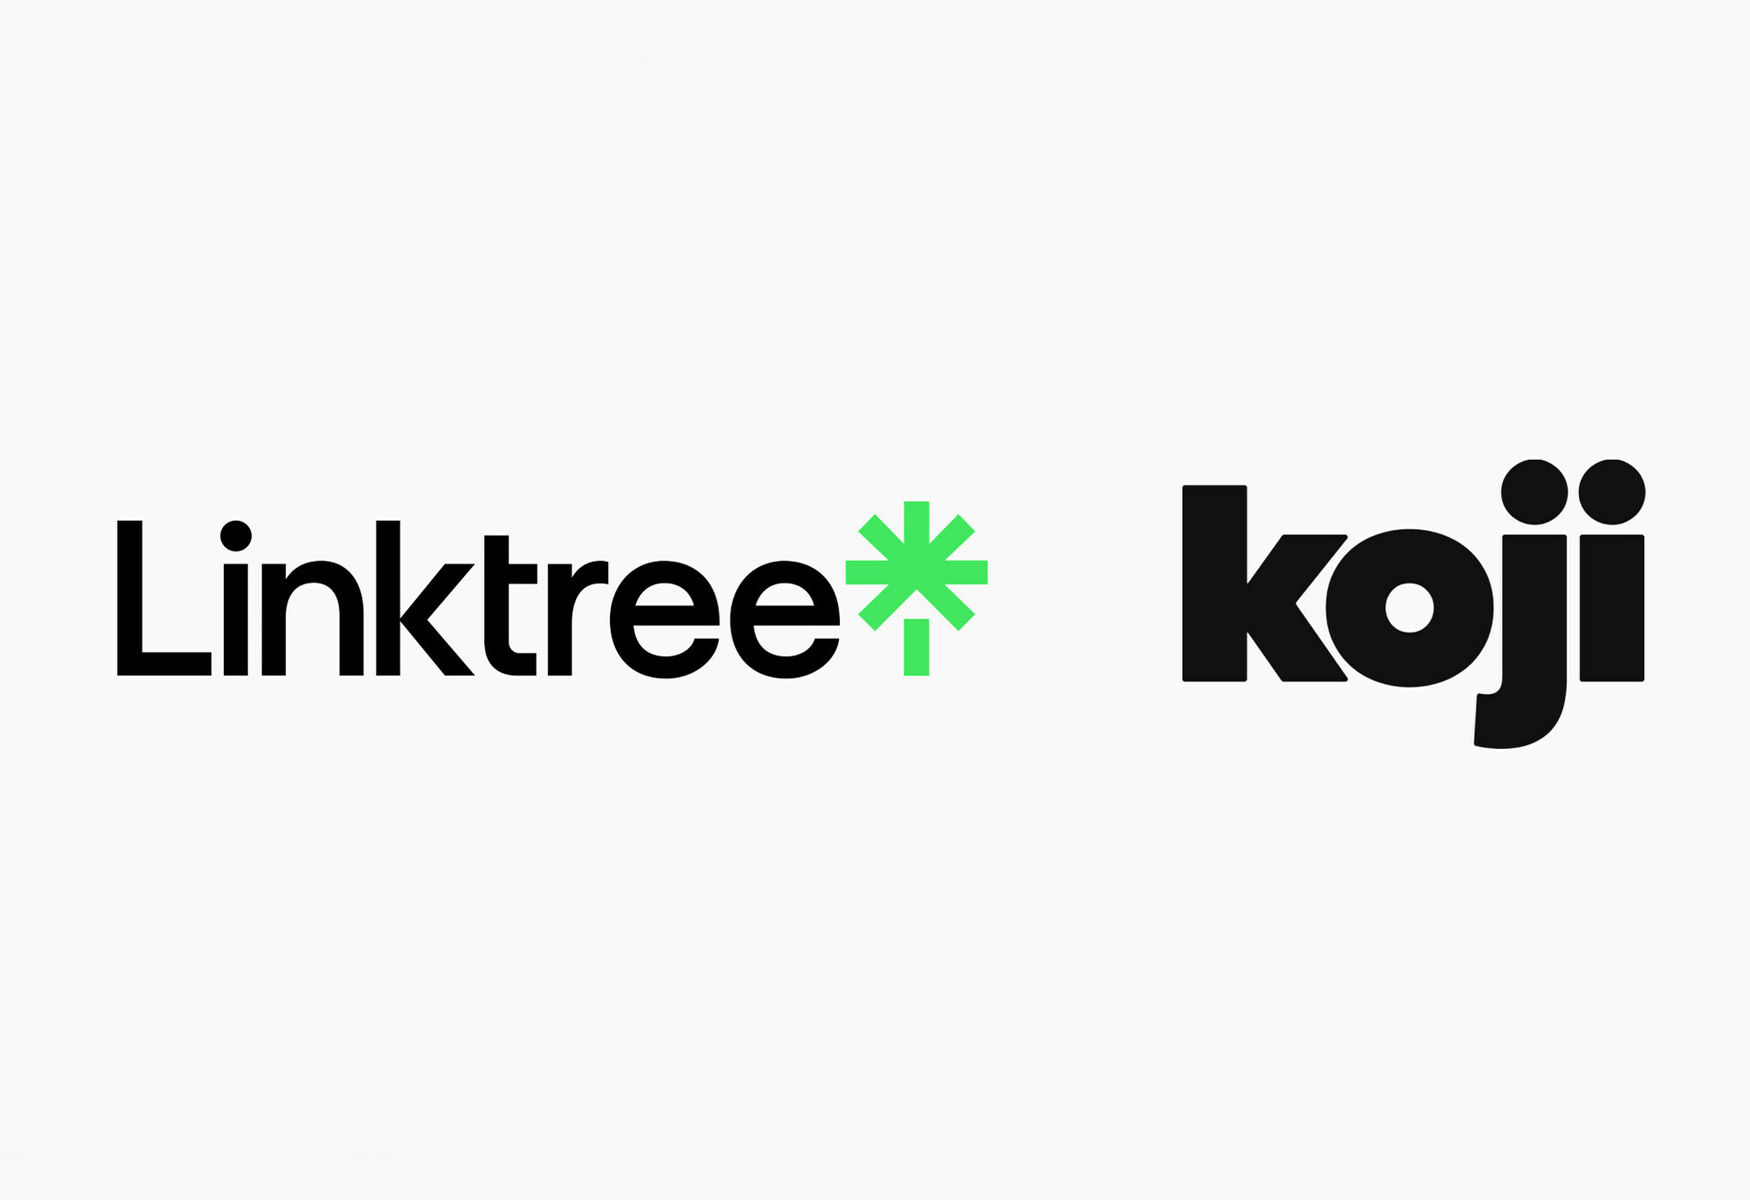 linktree-acquires-koji-expanding-its-reach-in-the-link-in-bio-space